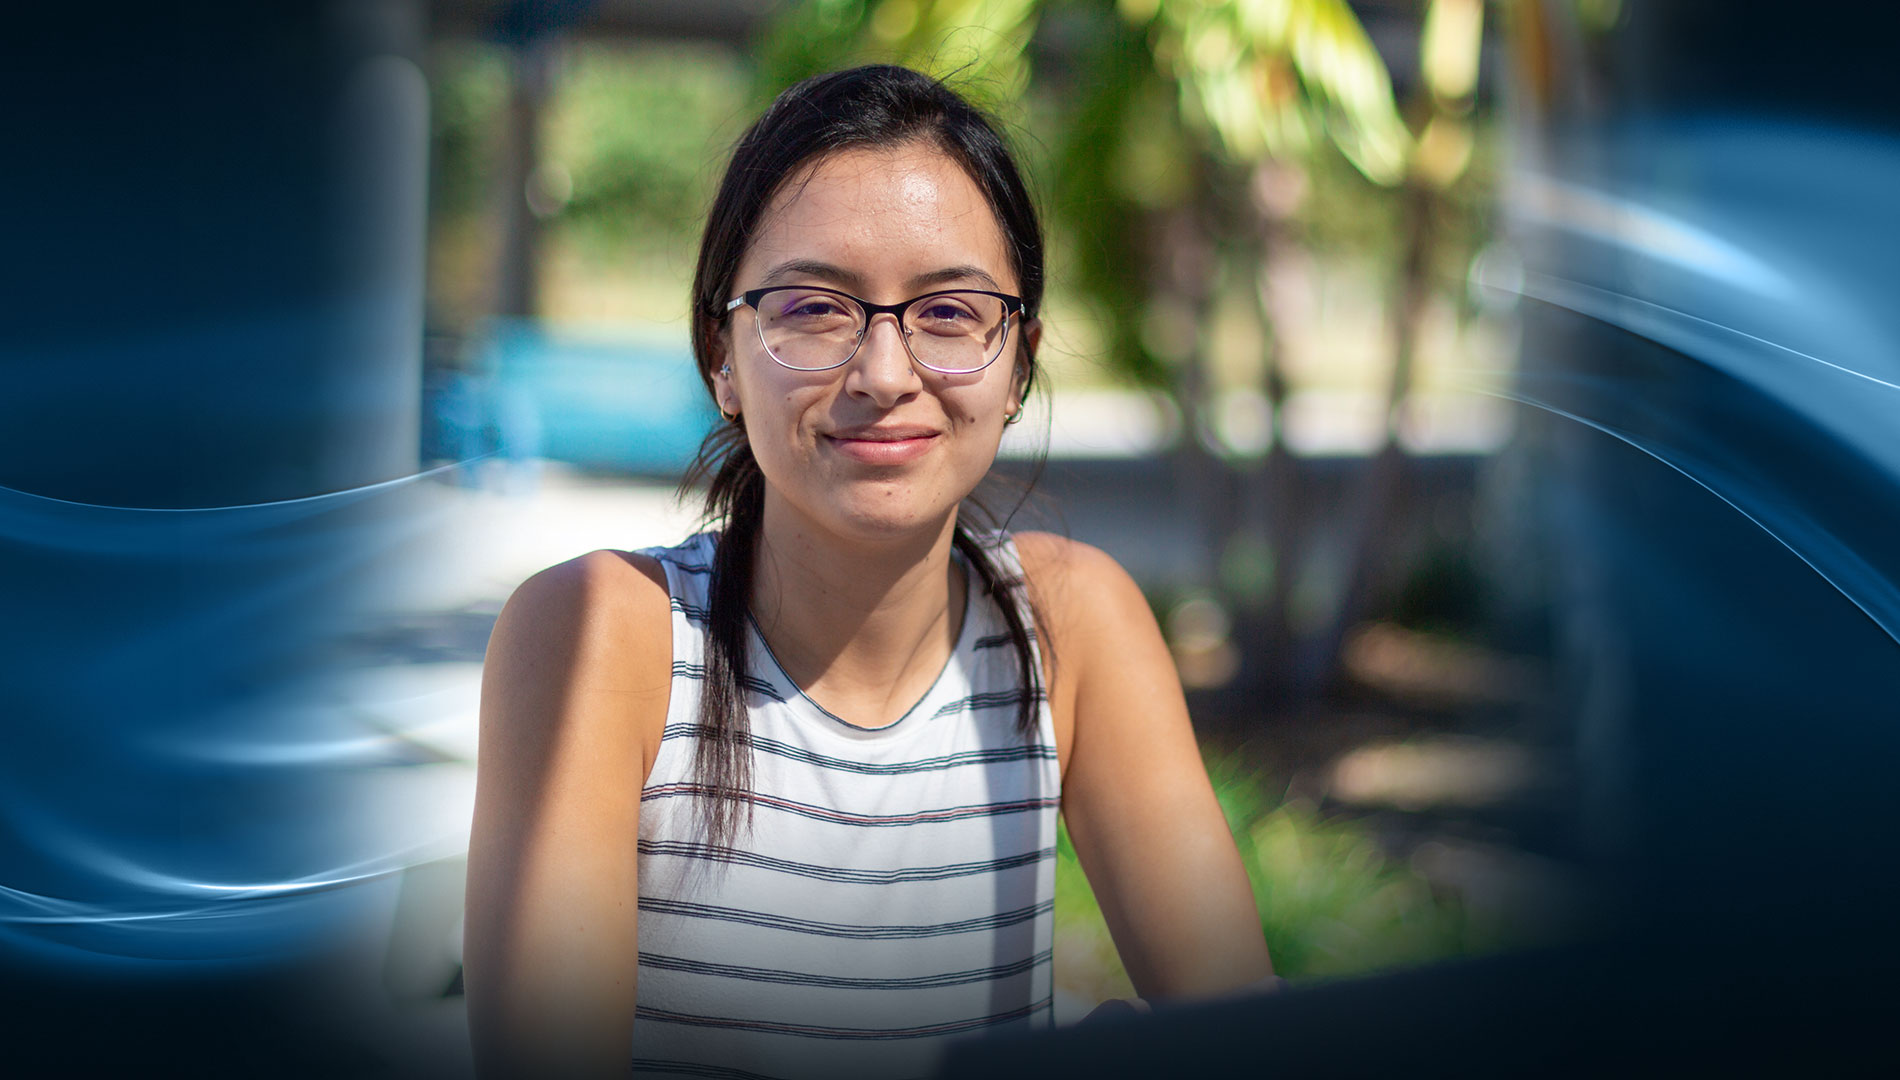 young female with glasses smiling about registering for fall class